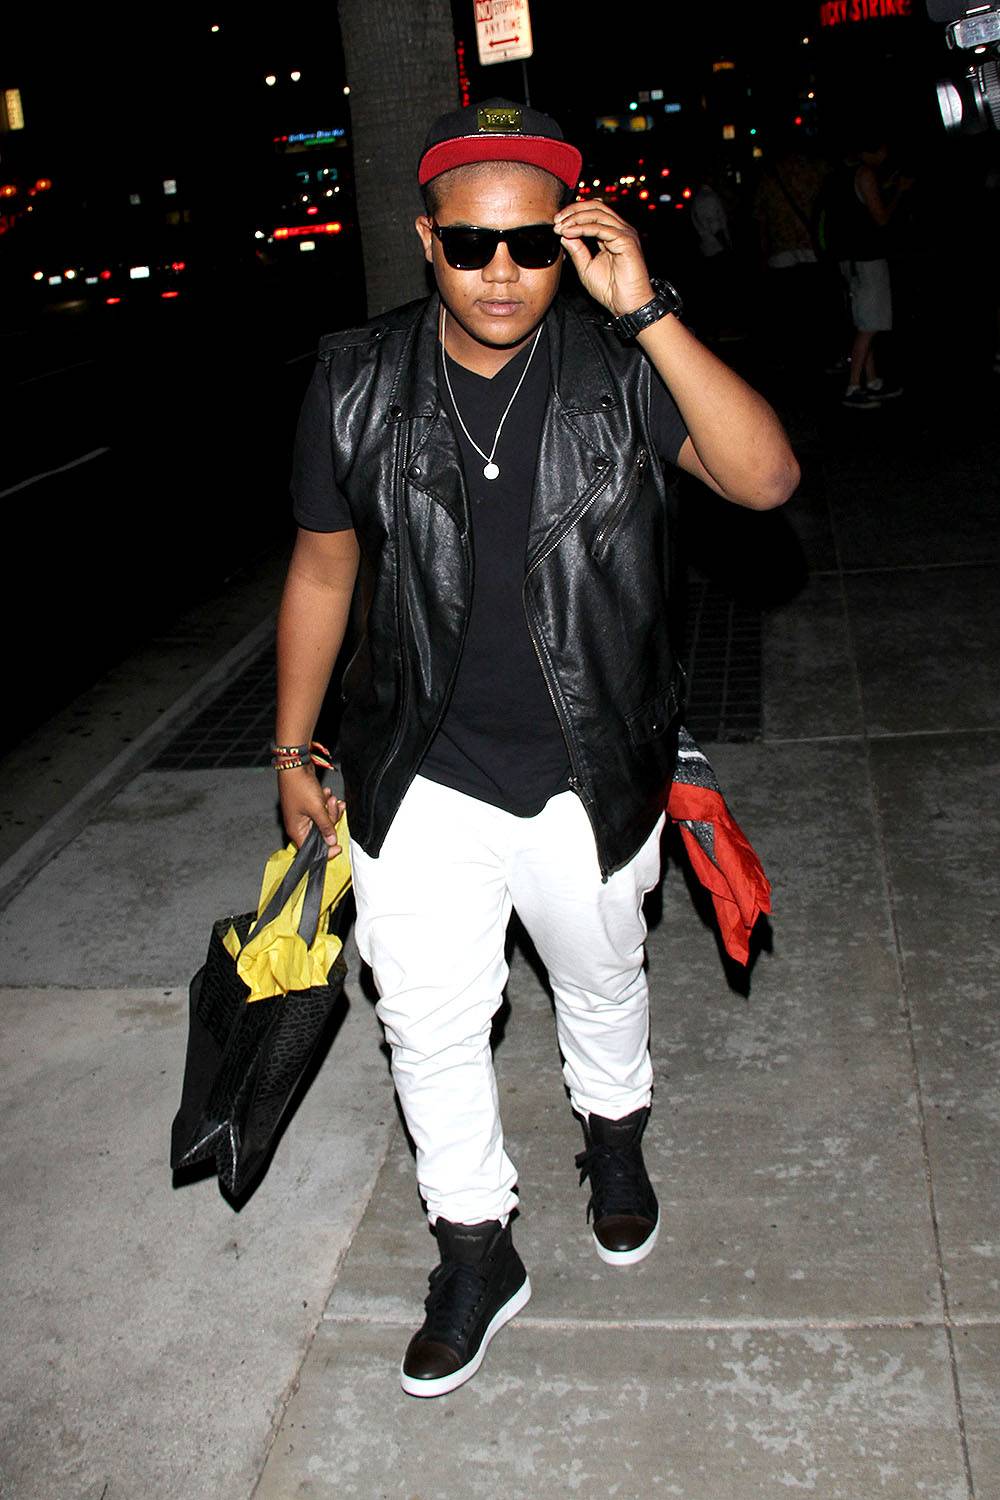 The New Kyle Massey - Viewers may remember Kyle Massey from his days as a child star but, he's all grown up now. Keep flipping for more information about the actor. (Photo: Try CW/WENN.com)